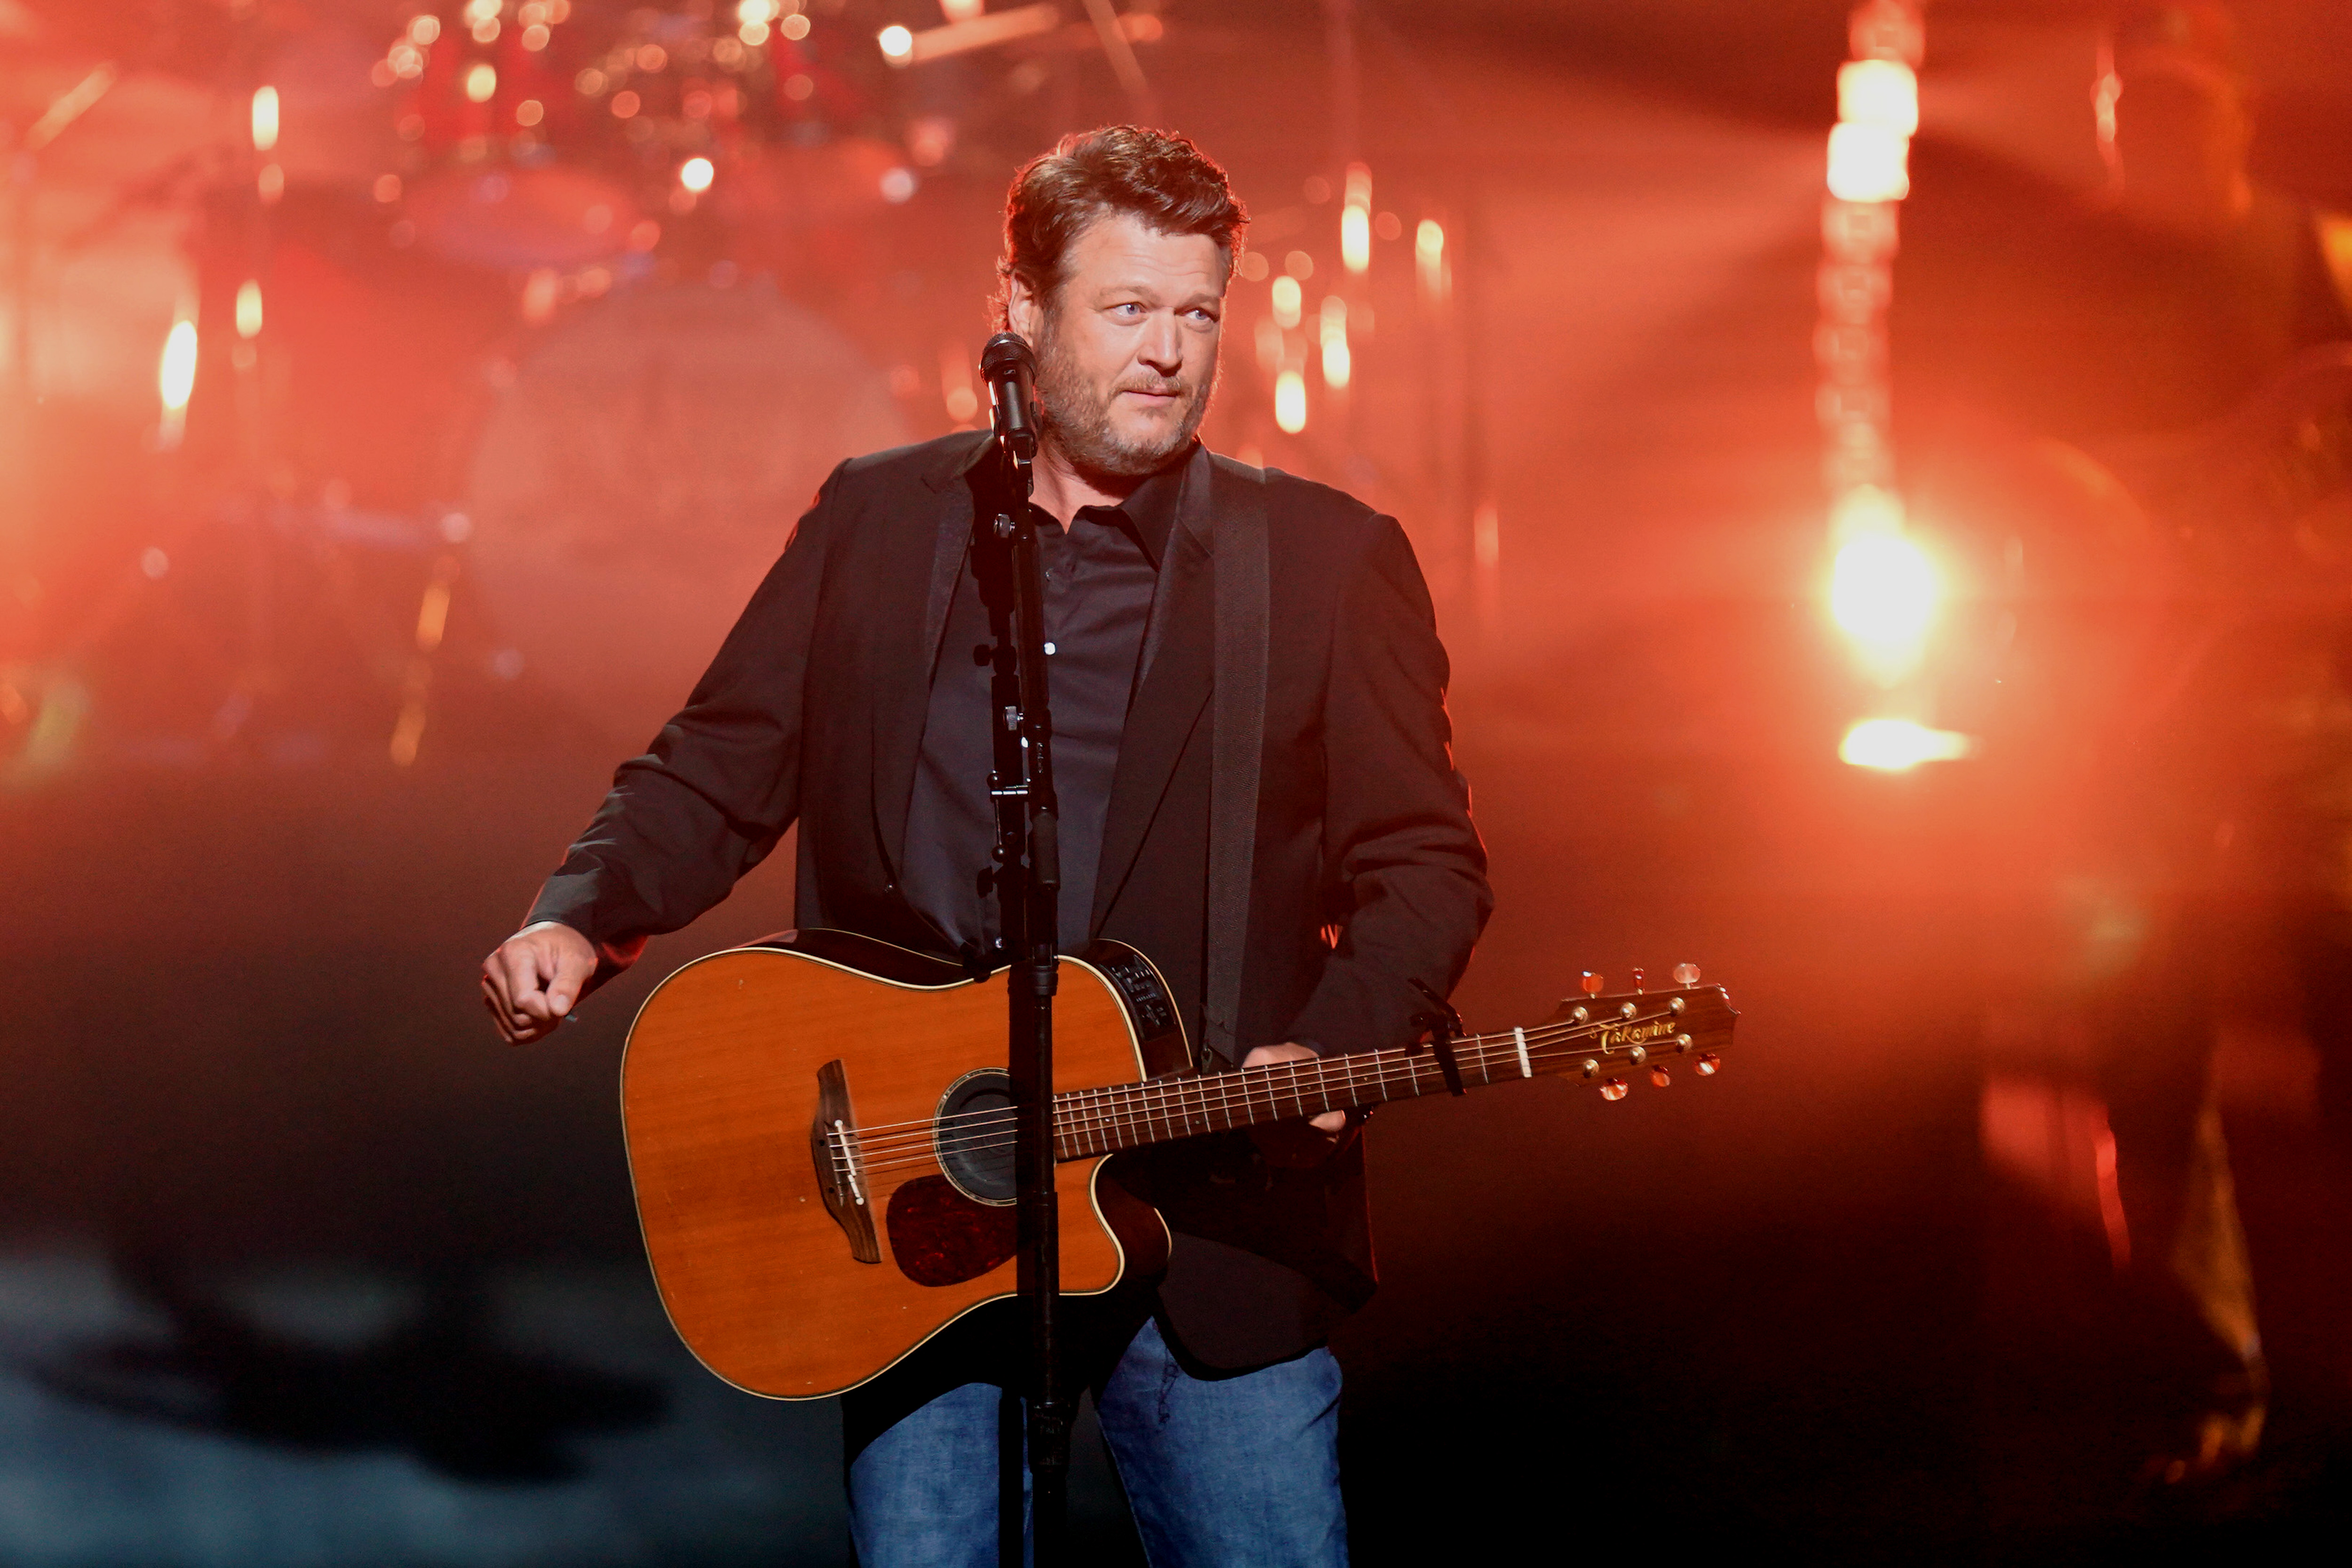 Blake is set to spend over a month away from home